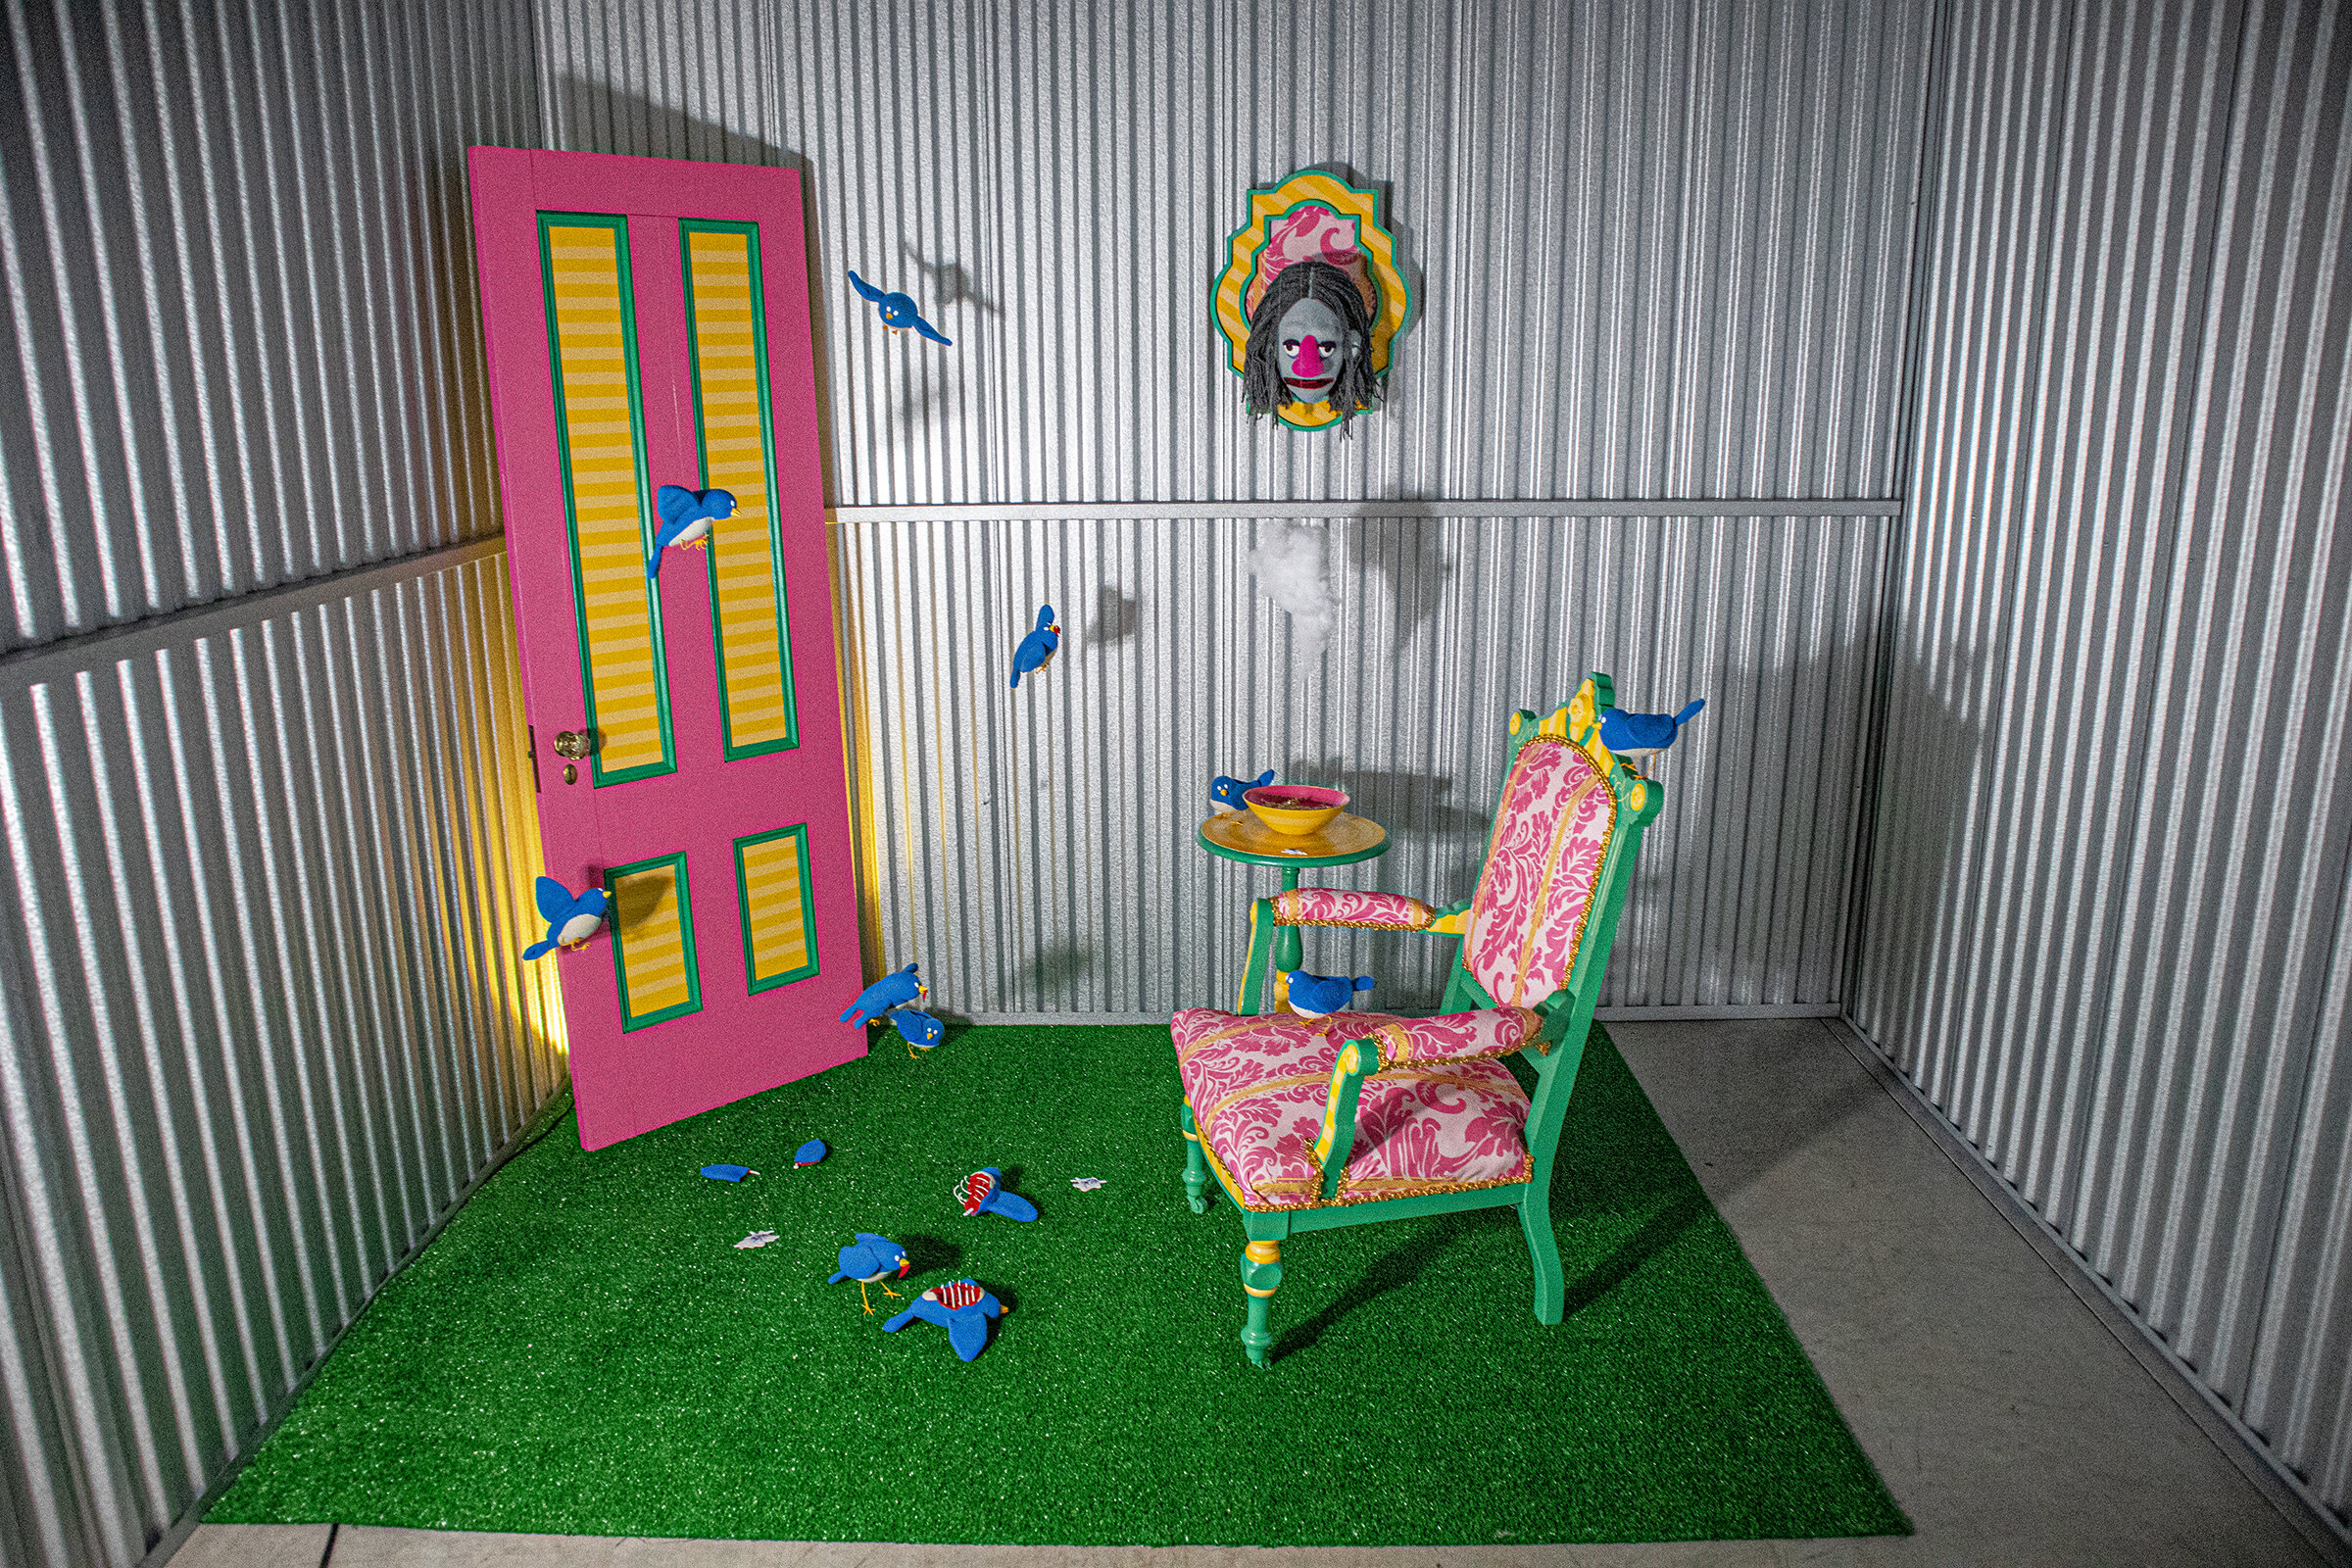  Day Dream  acrylic paint, latex paint, foam, fleece, felt, clay, wire, door, side table, bowl, mounting board, floral tape, cloth, rug, water, gold leaf, led lights, fishing wire, stuffing, yarn, glass door knob, 10' x 9' x 6', 2019 